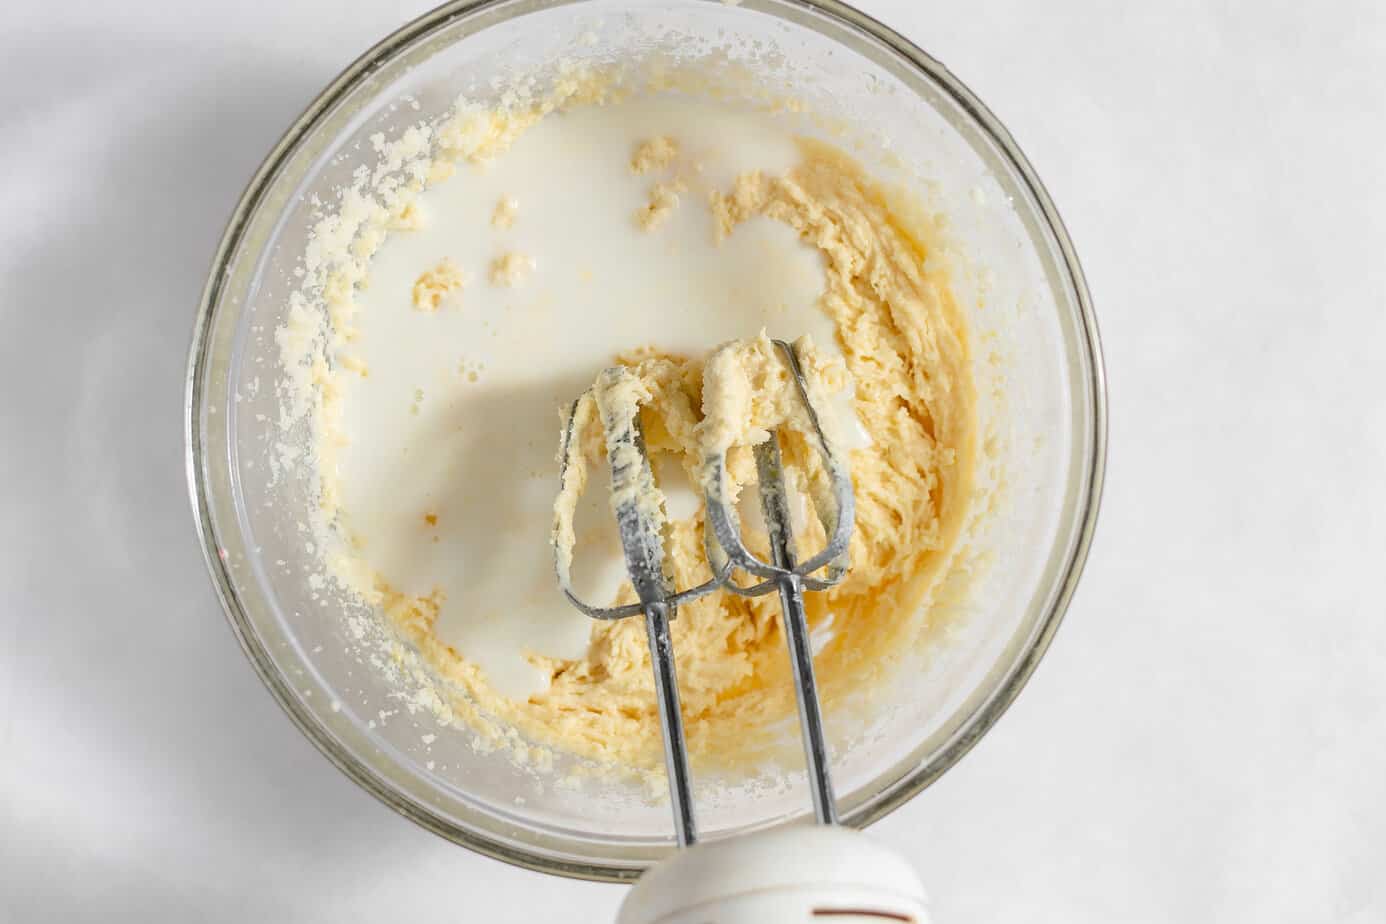 Milk added to the batter in a glass mixing bowl.